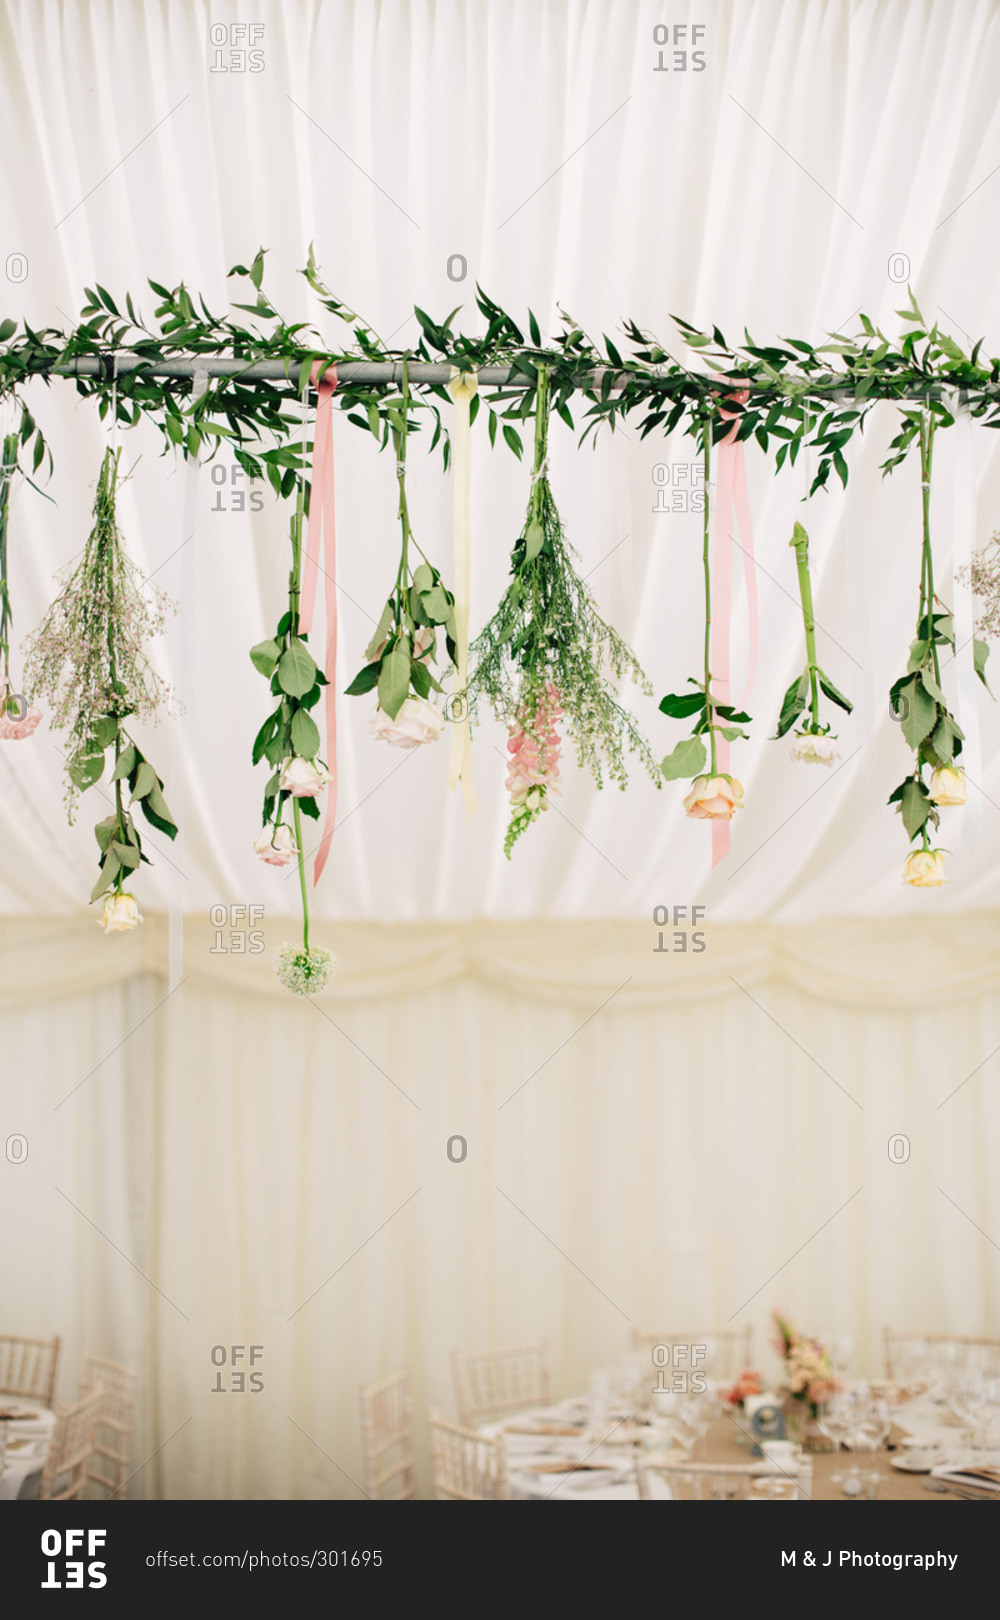 Garland of fresh flowers handing from tent pole for wedding reception